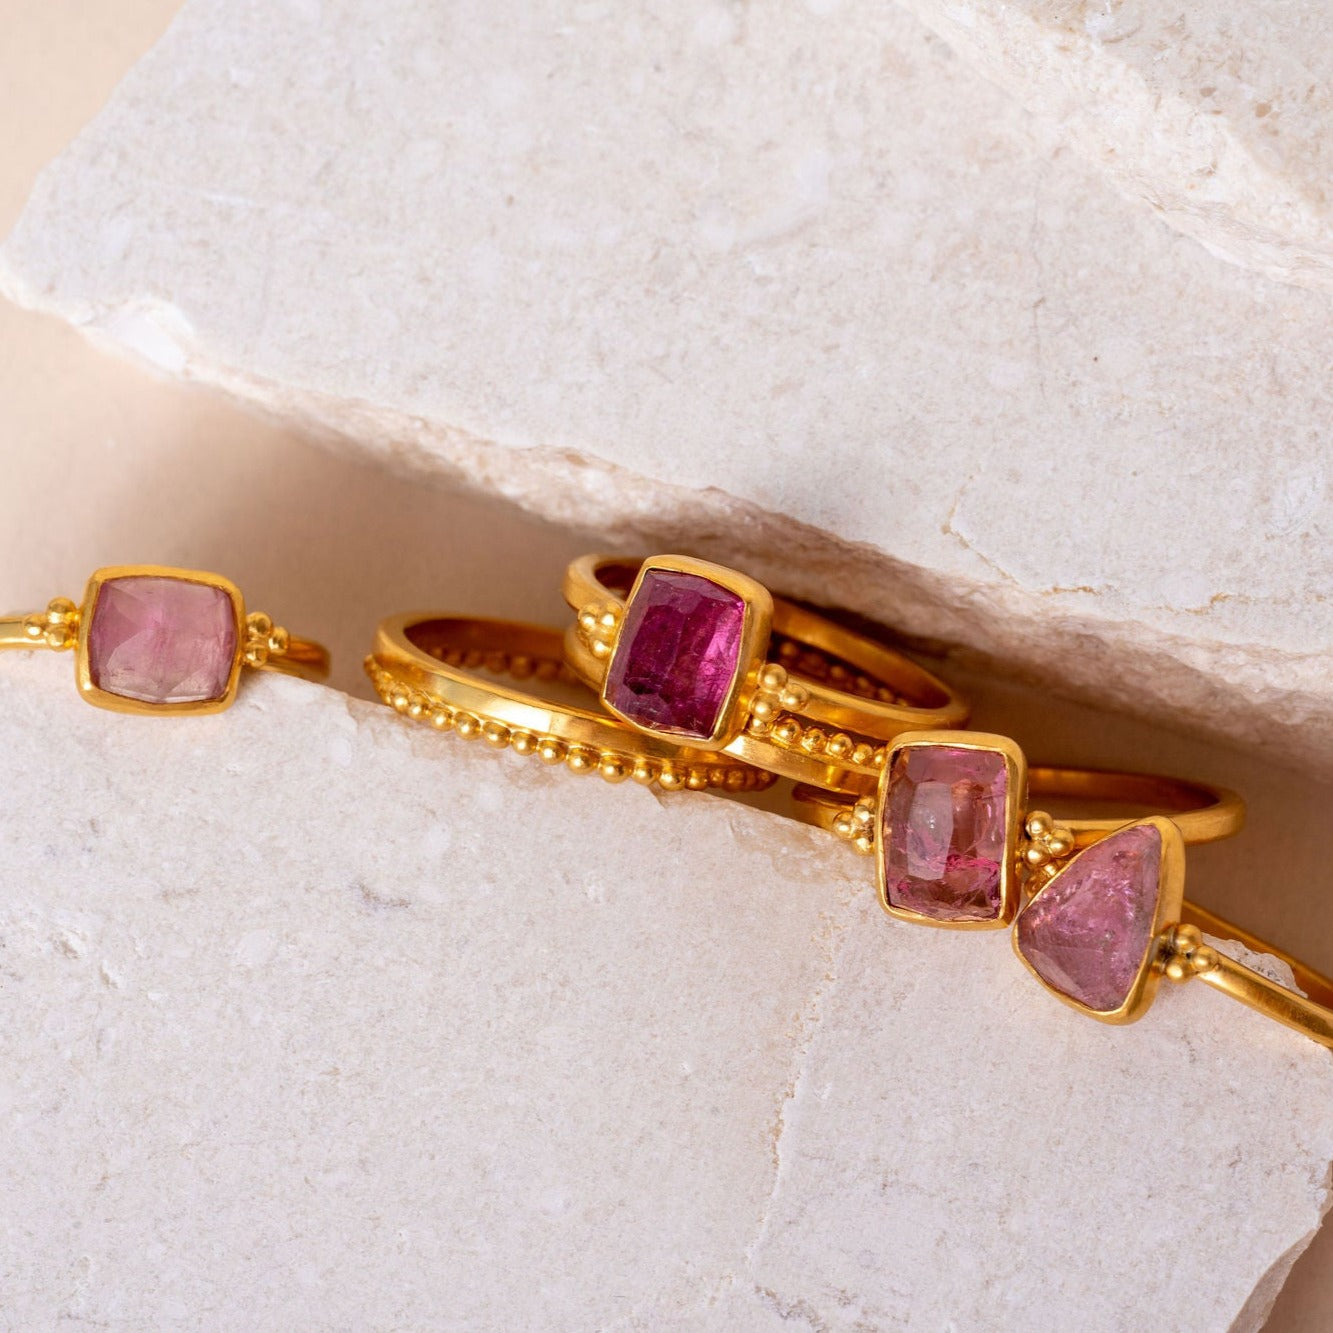 Collection of artisanal gold rings adorned with various hand-cut pink tourmalines, each featuring intricate granulation details